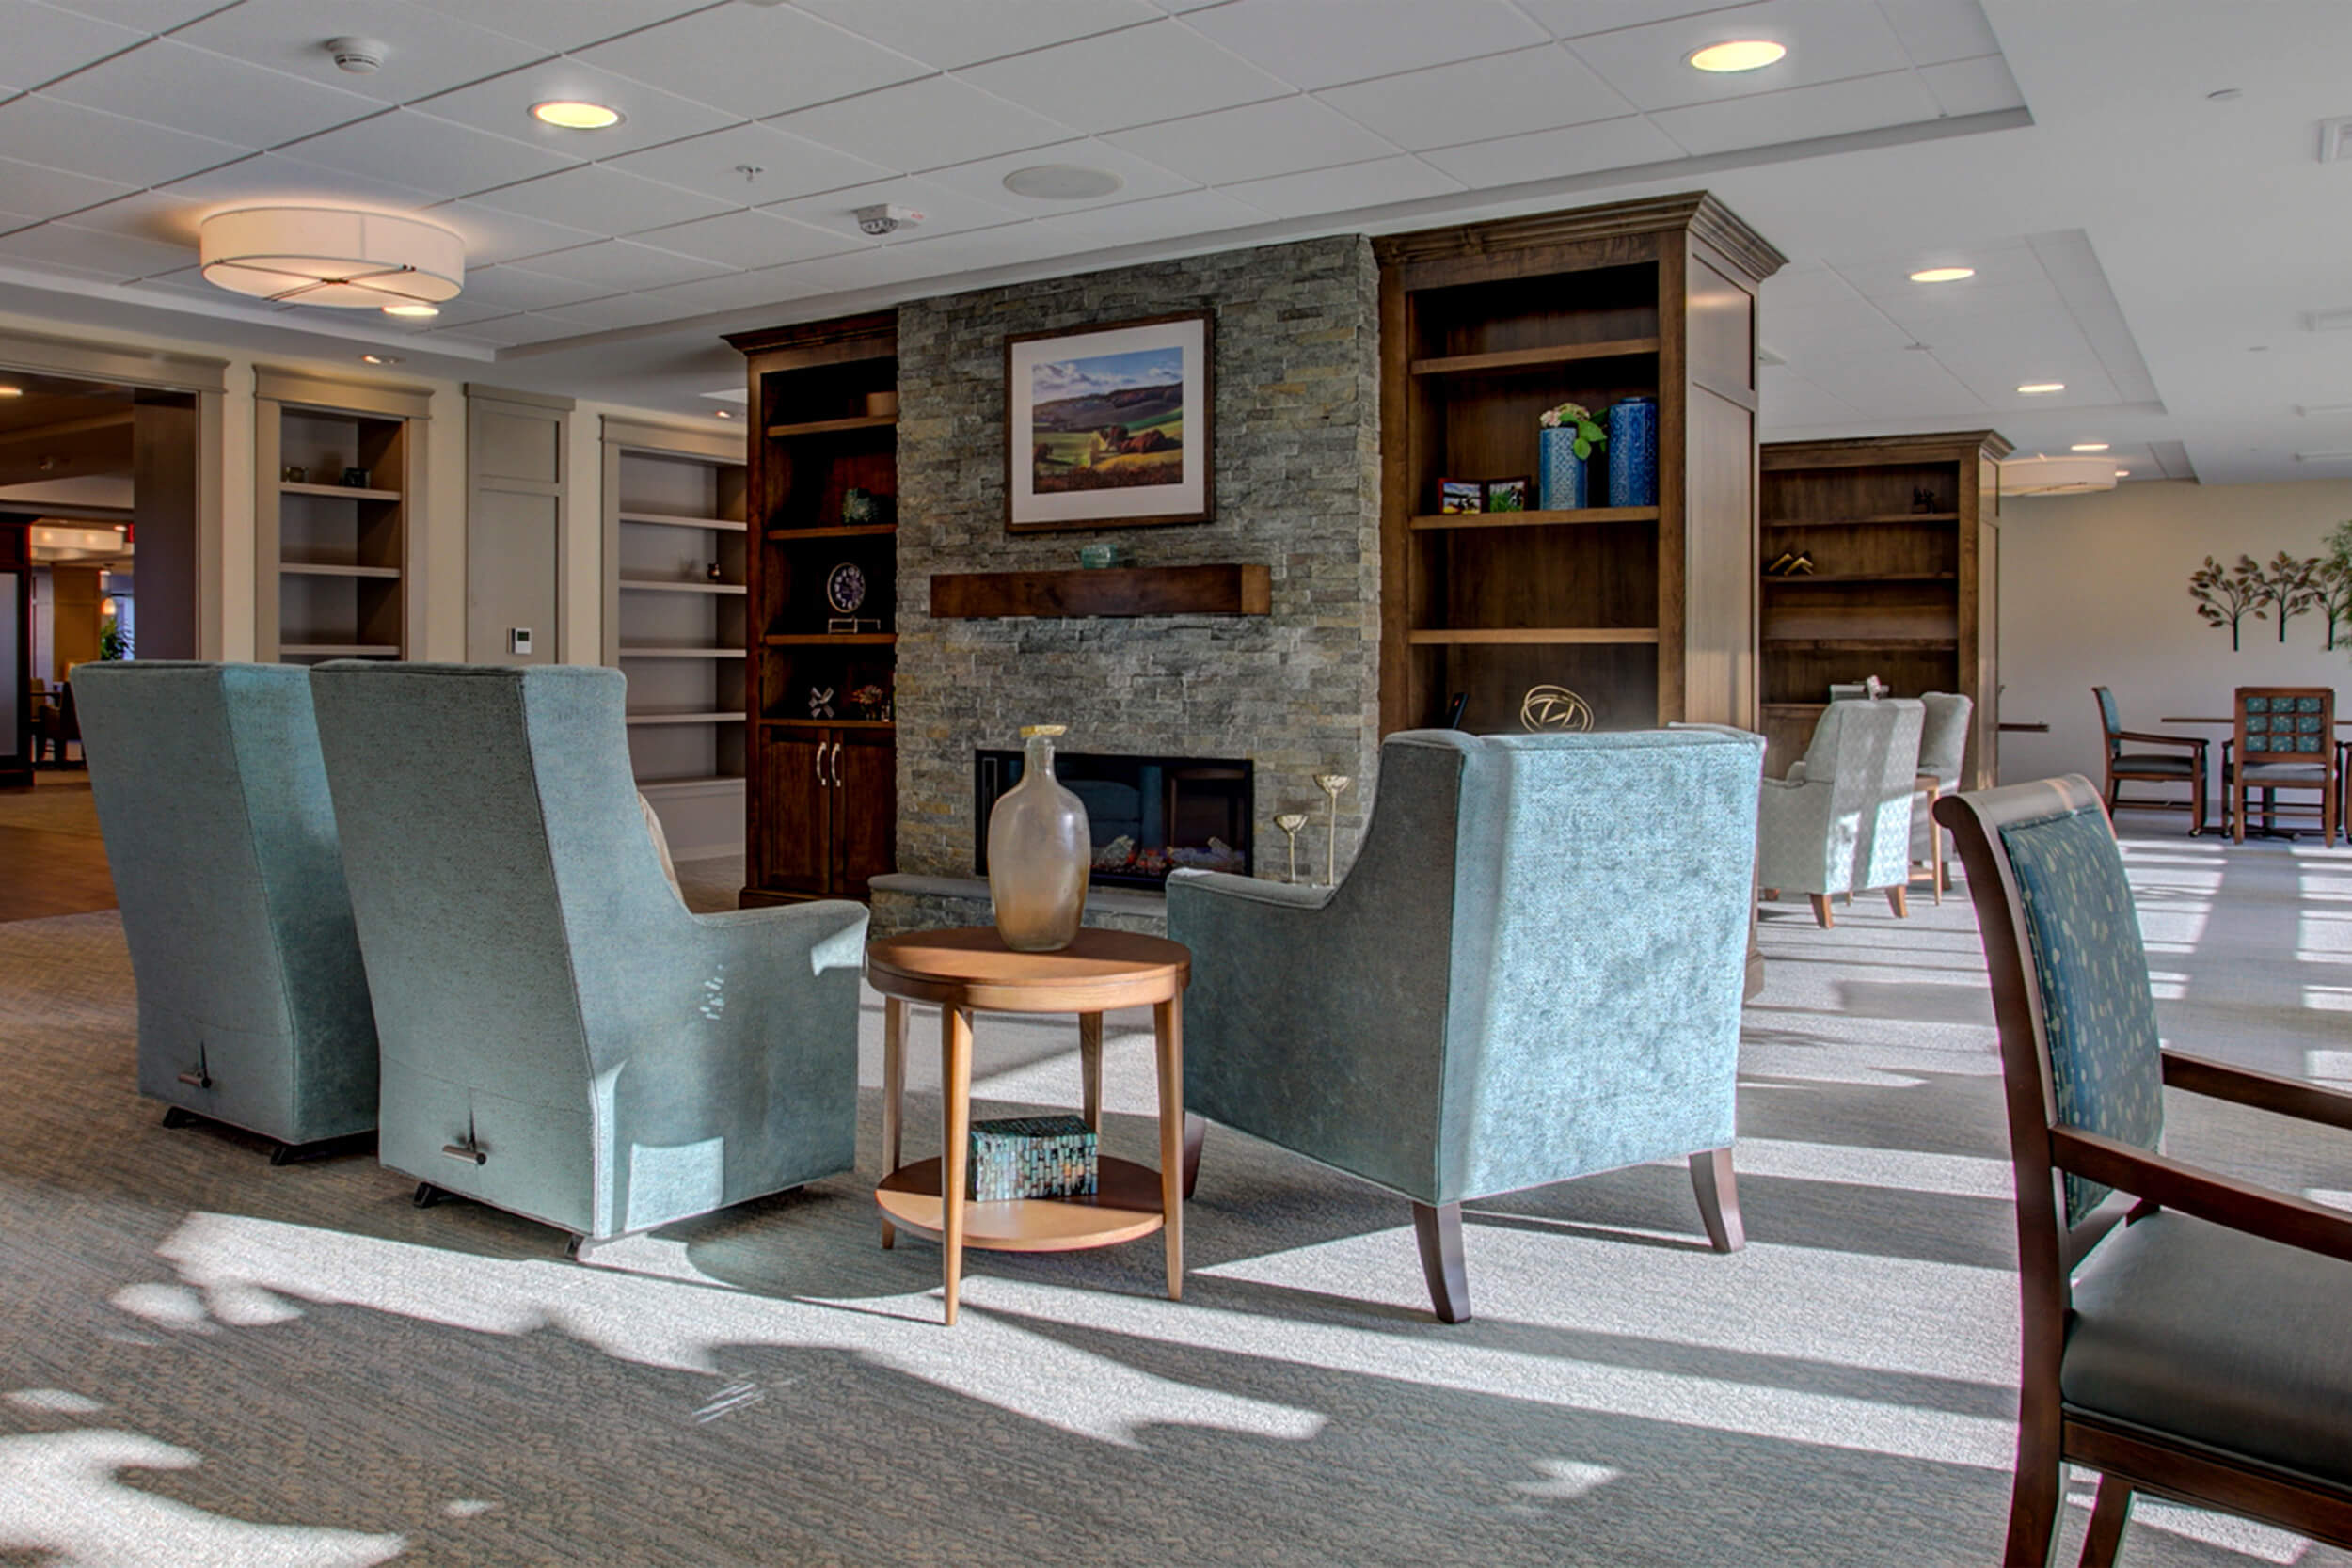 Interior view of living room area at a senior living facility. The room features neutral colored walls and grey wood flooring. Blue upholstered chairs and a small end table face a stone fireplace with bookcases on either side.